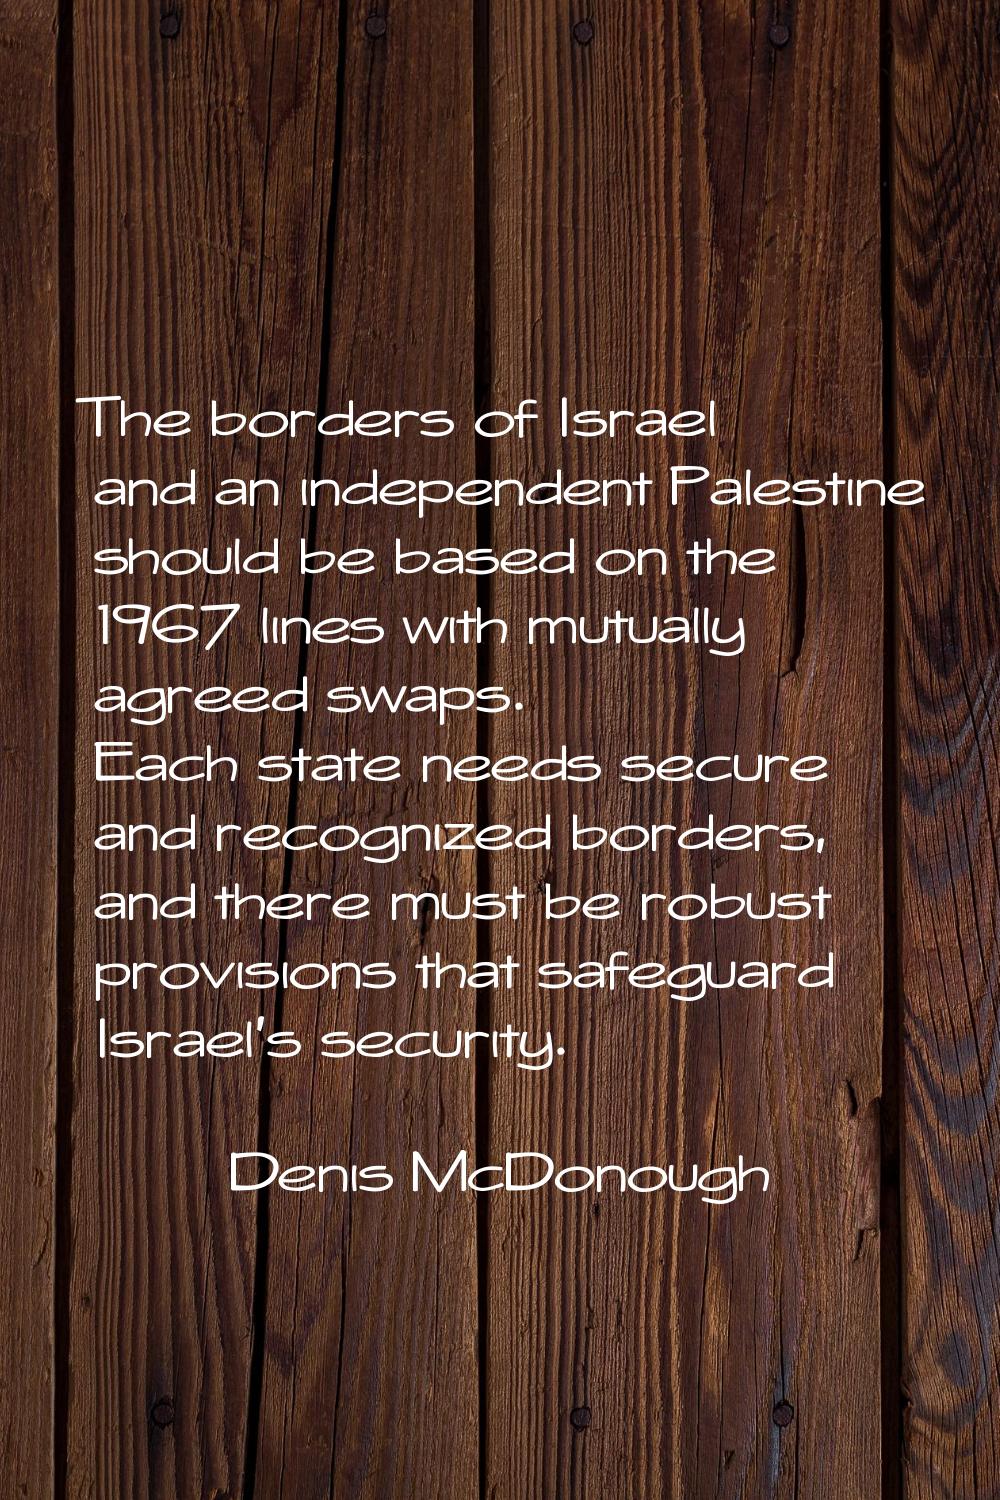 The borders of Israel and an independent Palestine should be based on the 1967 lines with mutually 